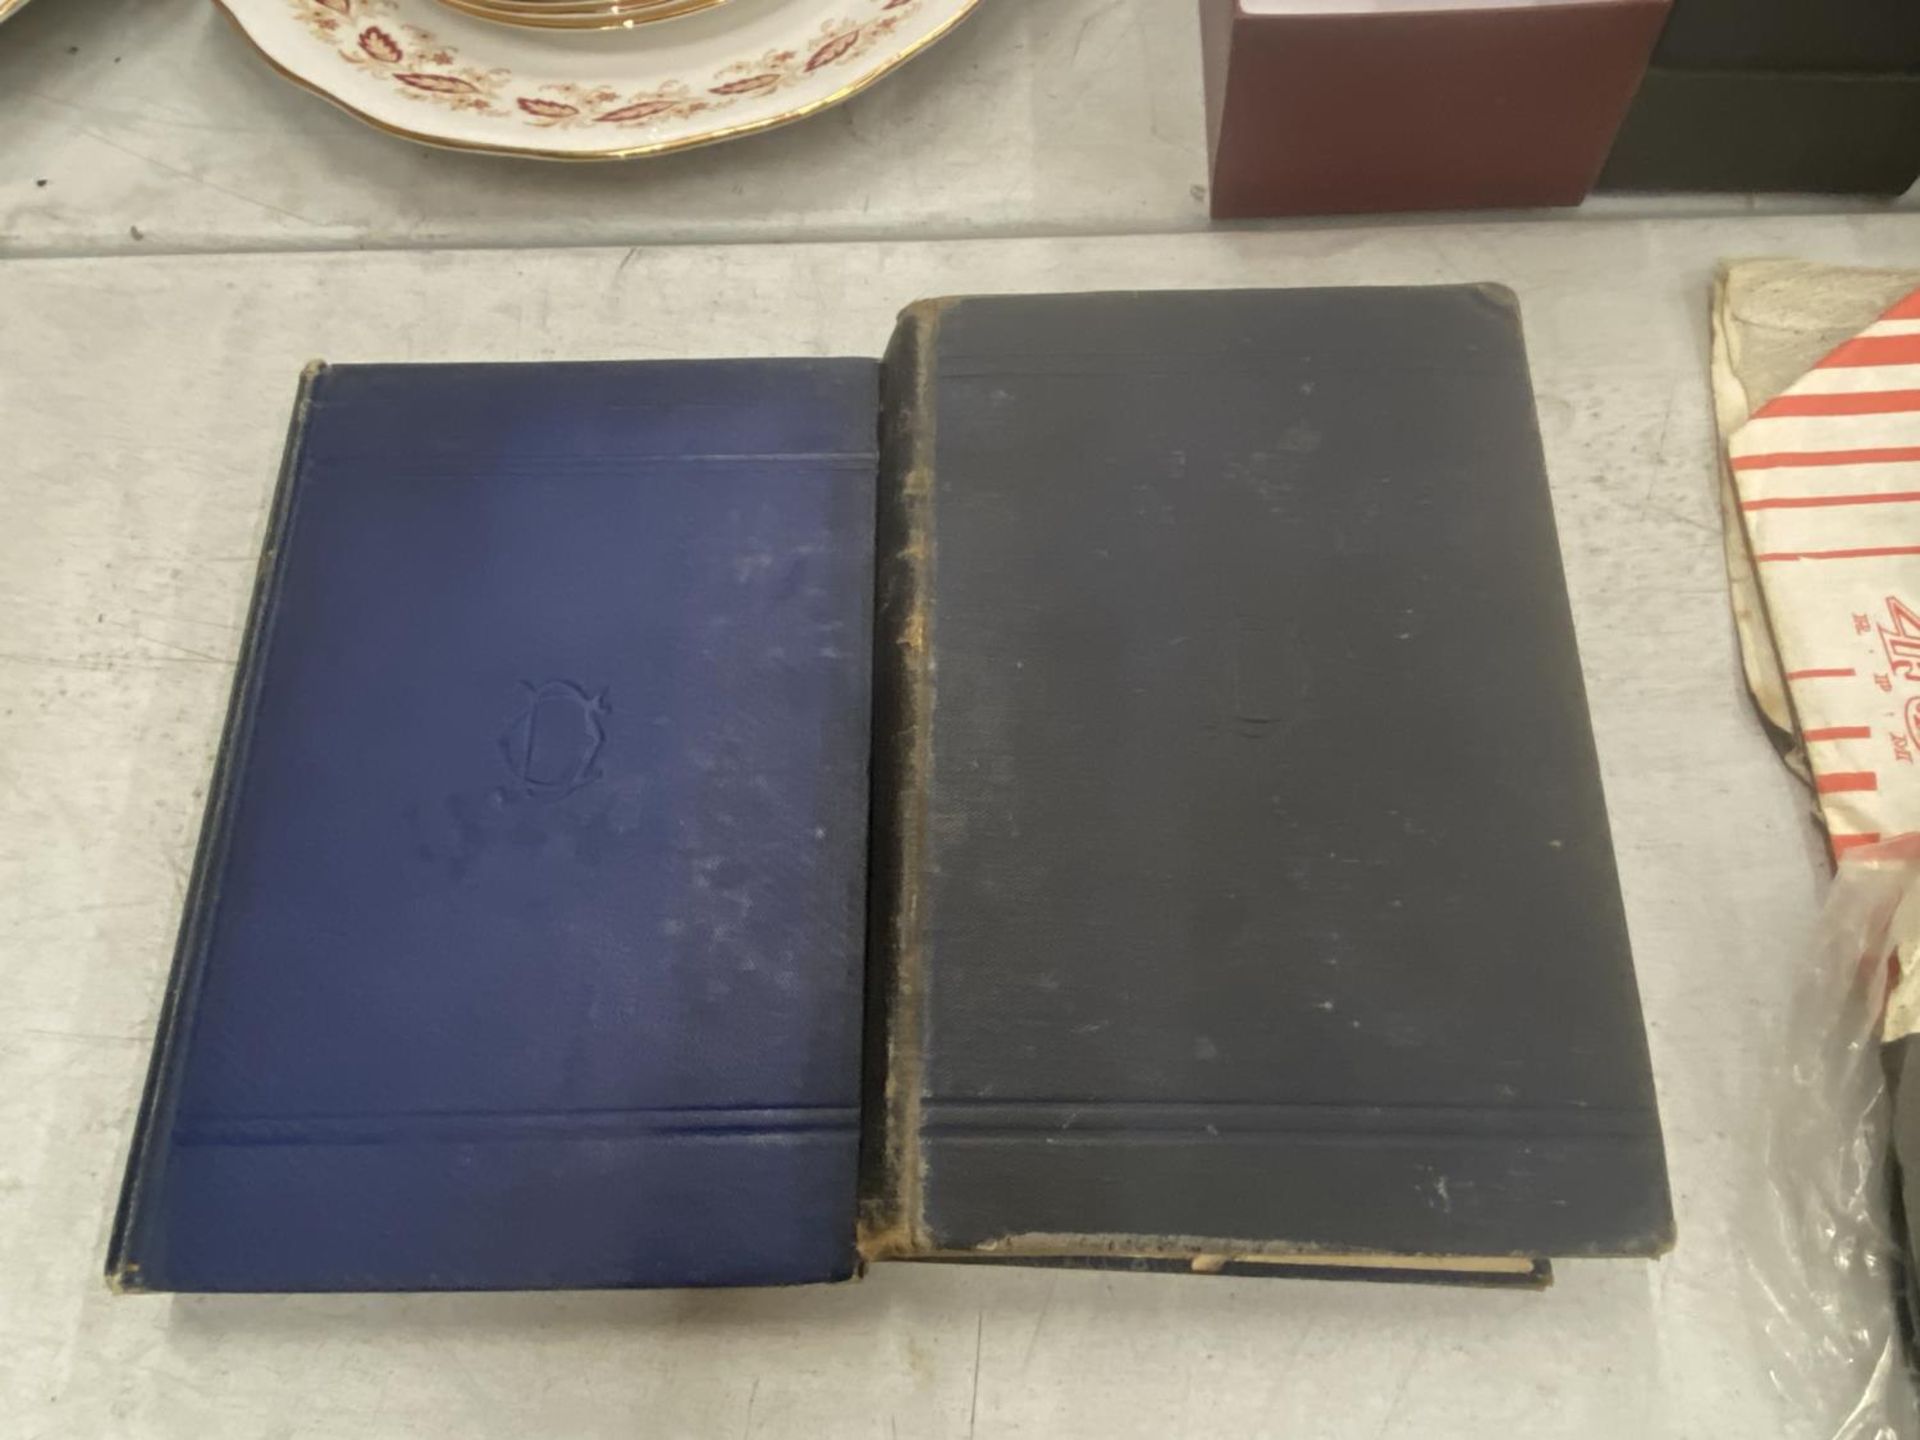 TWO ANTIQUARIAN CHARLES DICKEN NOVELS - 'DAVID COPPERFIELD' AND HARD TIMES AND PICTURES FROM ITALY'